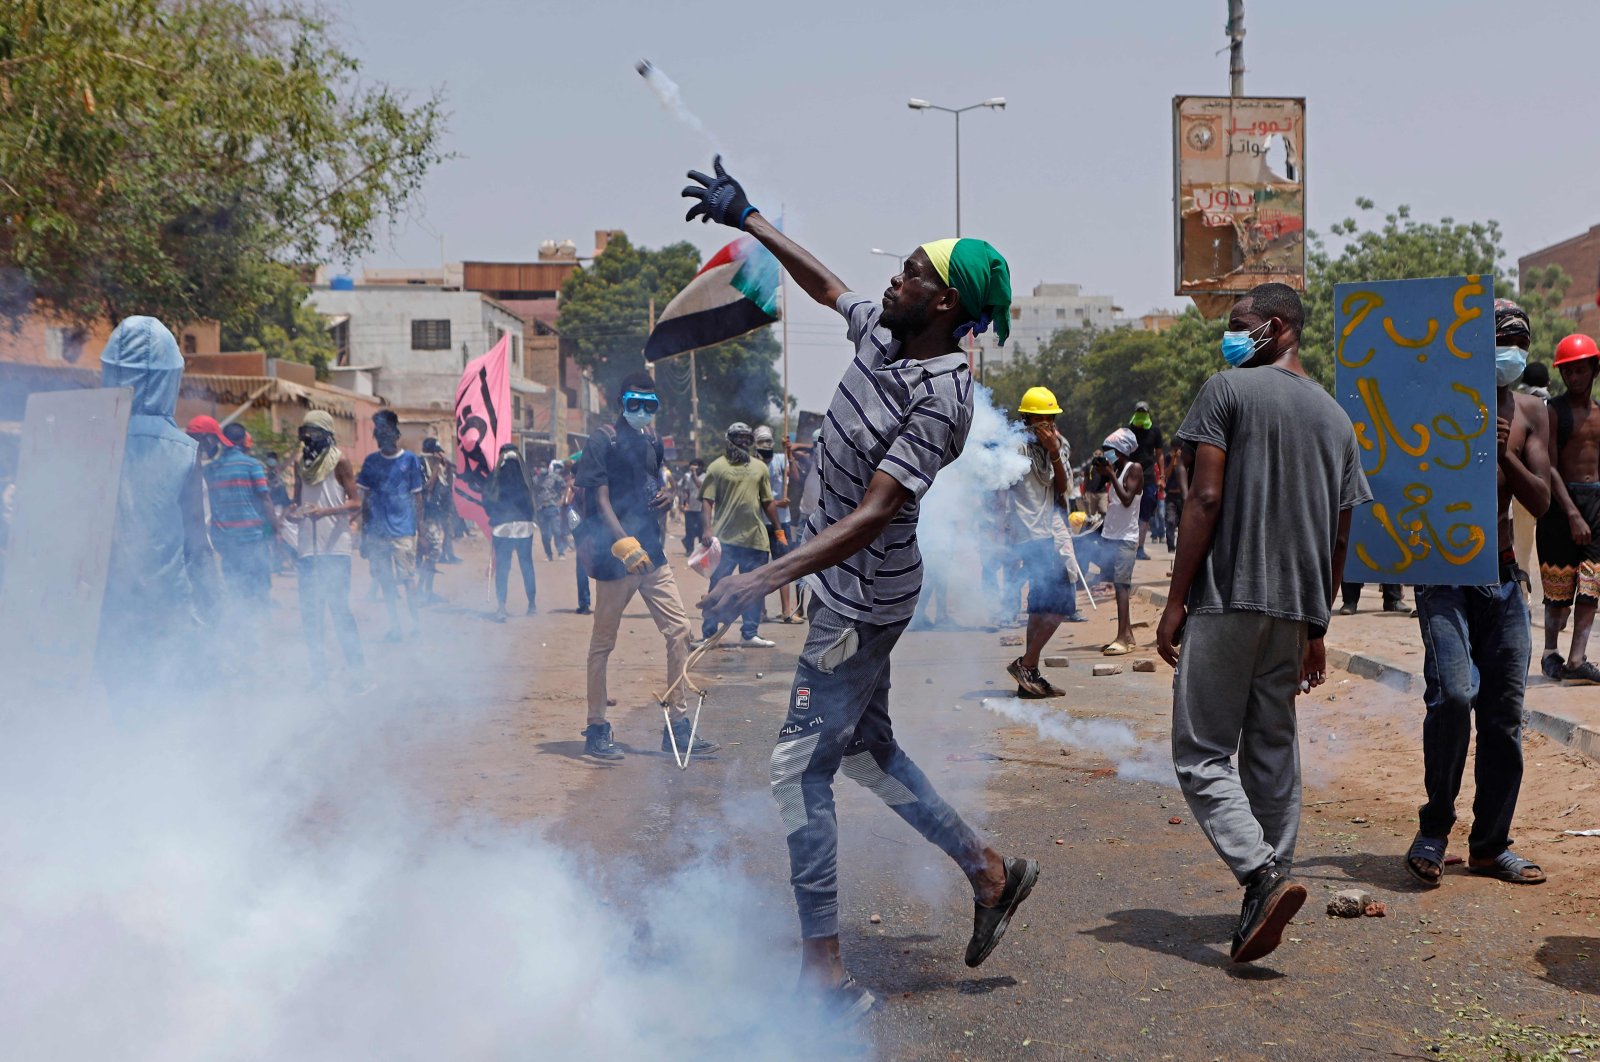 An anti-coup protester throws back a tear gas canister at security forces during clashes amid mass demonstrations against military rule, Khartoum, Sudan, June 30, 2022. (AFP Photo)